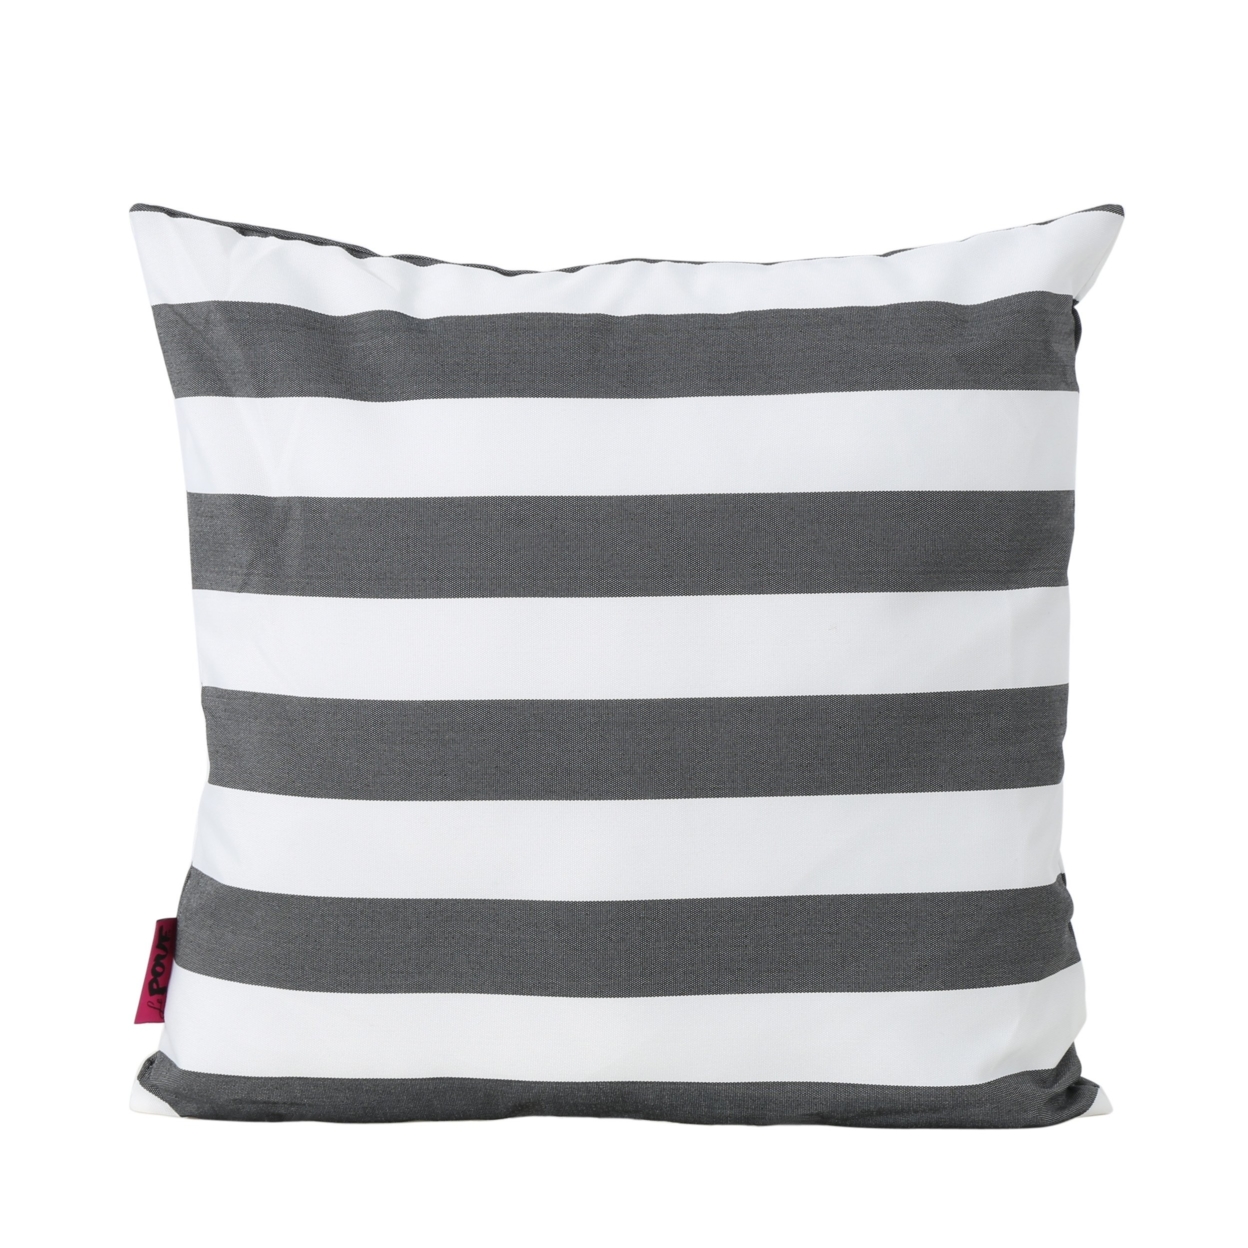 La Mesa Indoor Striped Water Resistant Square Throw Pillow - Brown/white, Set Of 2